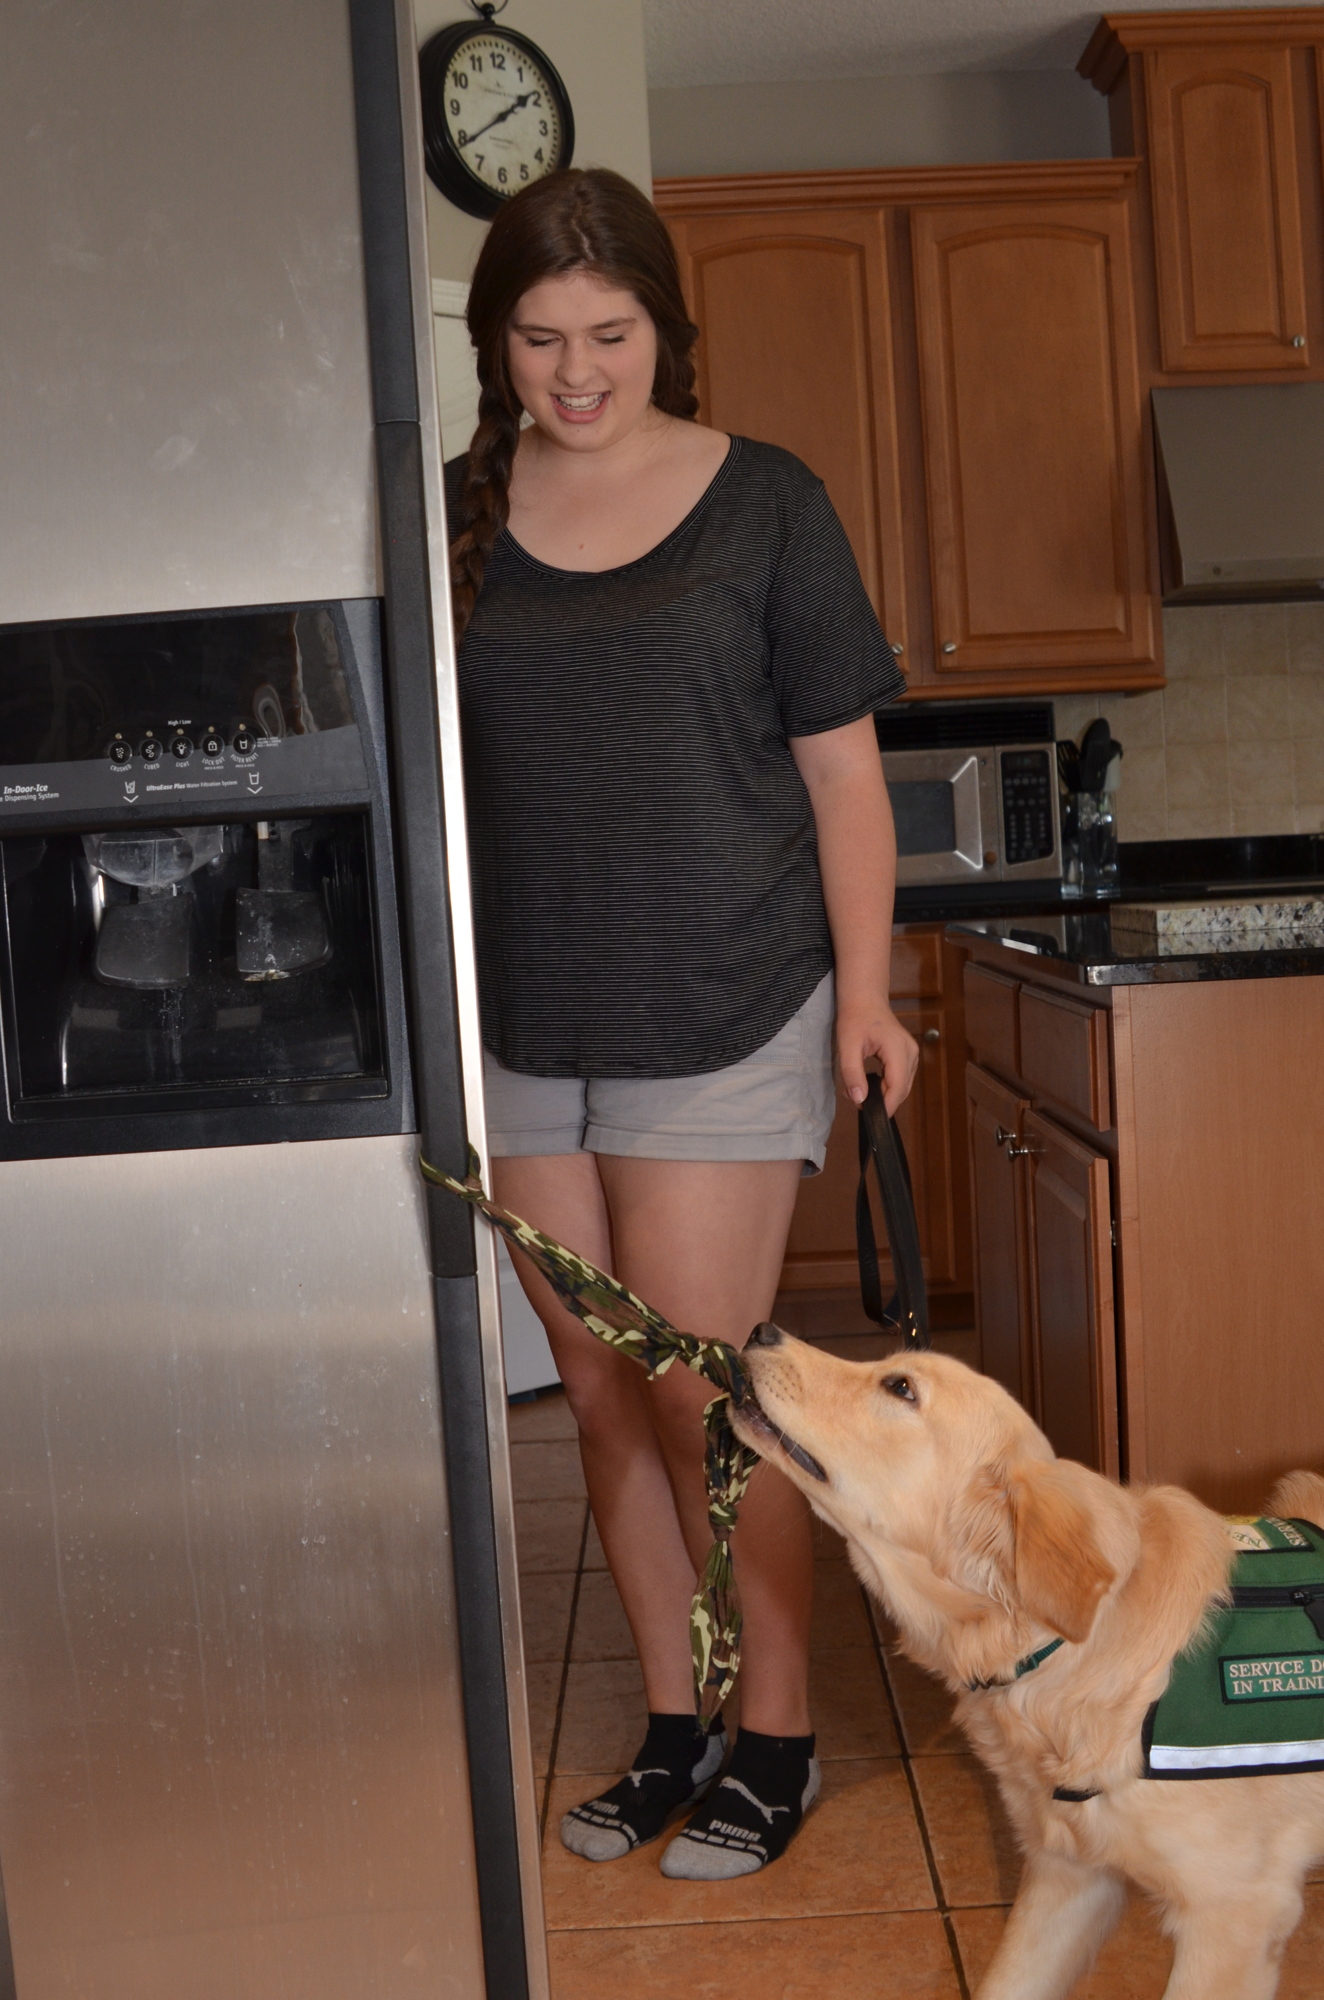 Ashton Kaatz, 15, is training 6-month-old Duchess to help someone who needs assistance through New Horizons Service Dogs.